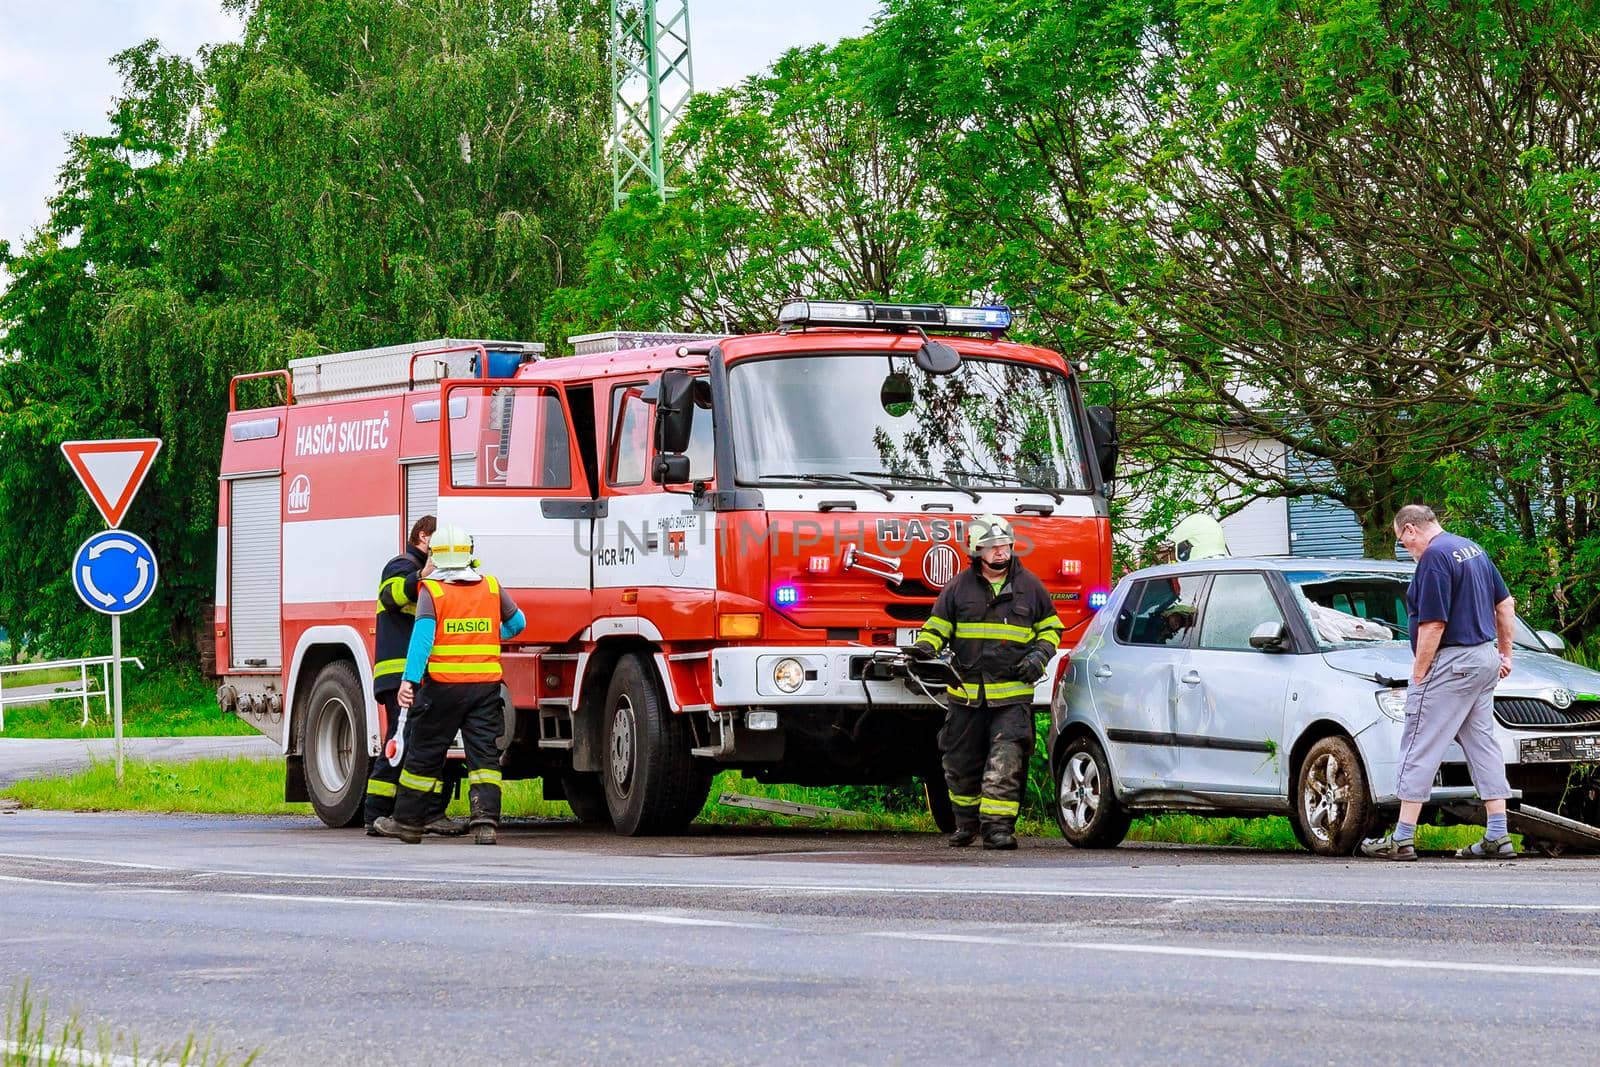 Skutech, Czech Republic, 26 June 2020: Car accident, the car drove off the road. Rescuers and police officers provide assistance. Police car and fire engine.